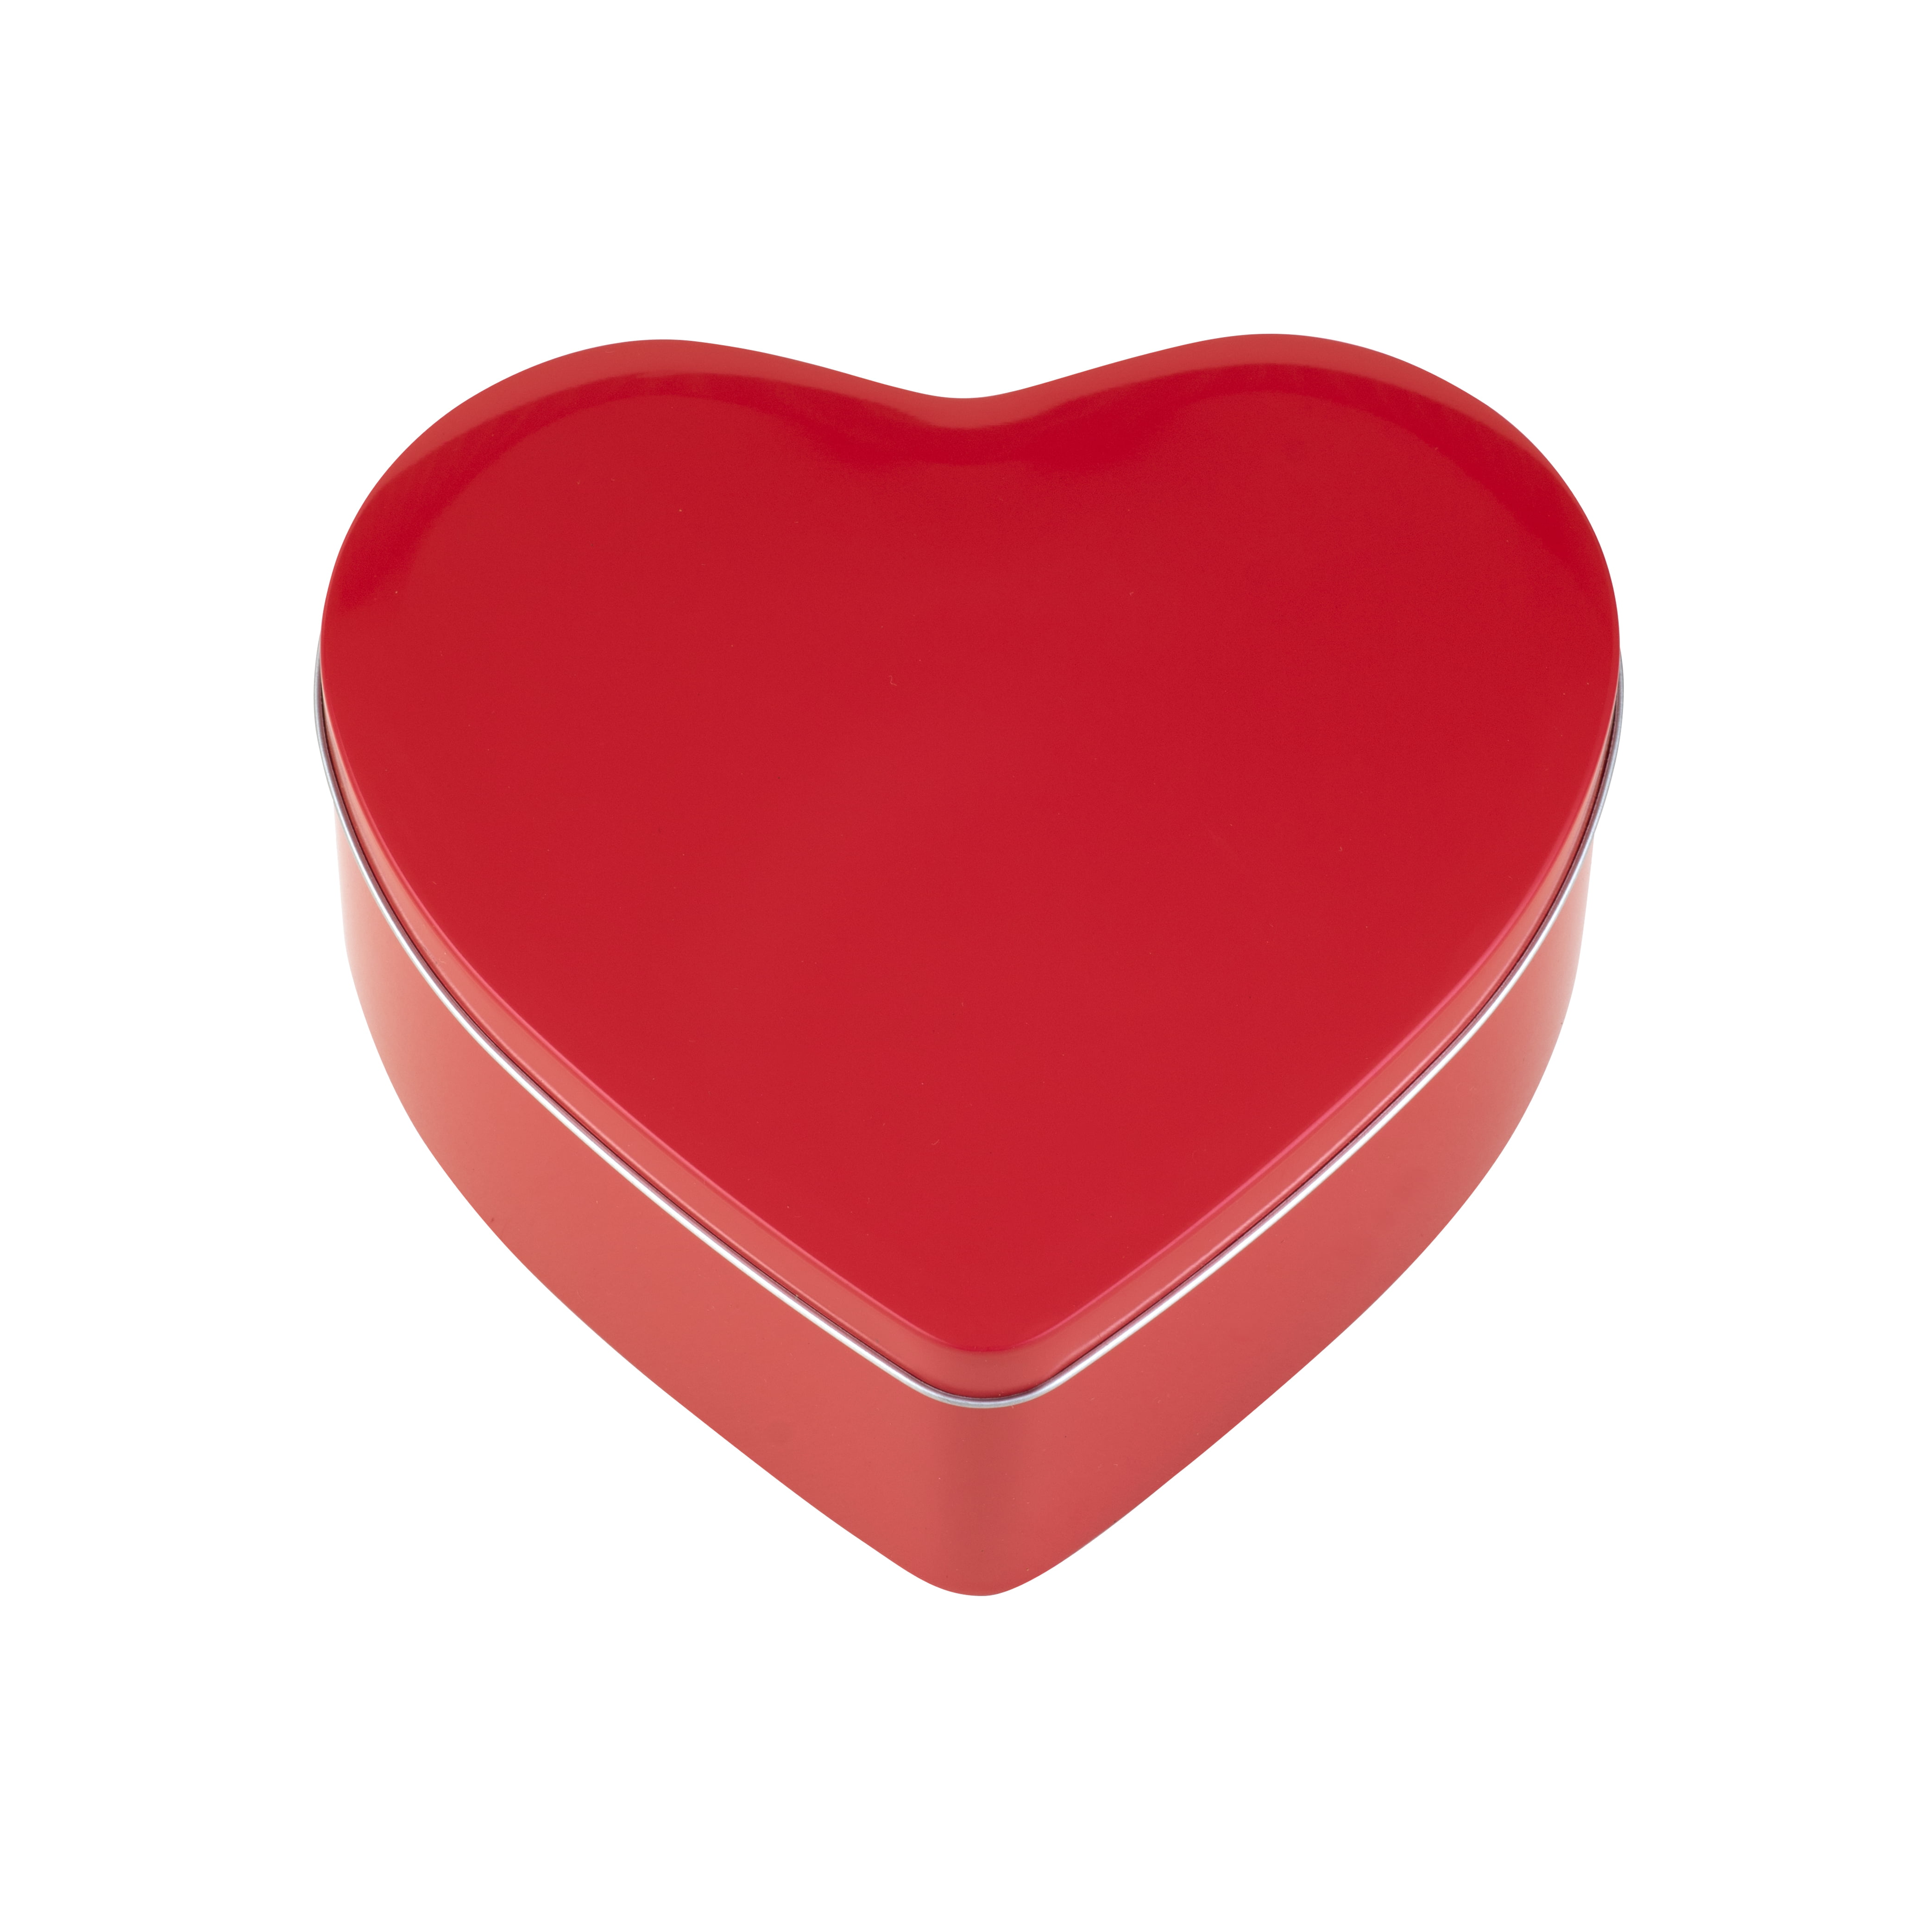 WAY TO CELEBRATE! Way to Celebrate Valentines Heart Tin, 1 Ct. Gift Box, Red, Food Safe, Hand Was Only